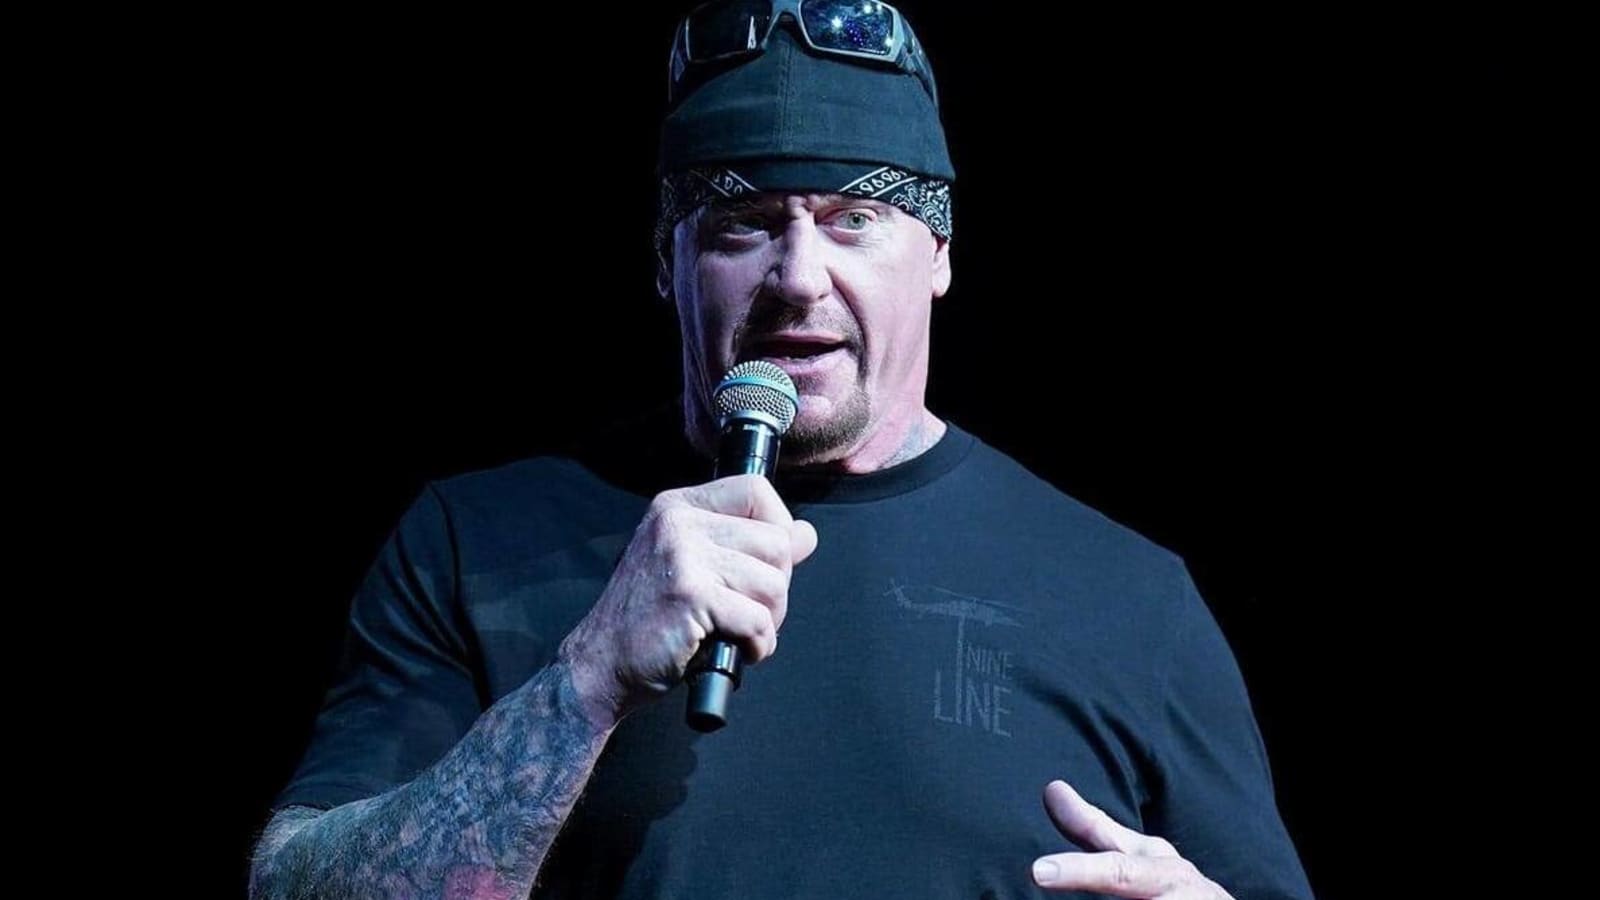 The Undertaker Reveals Huge Change In Current WWE Recruiting Approach Compared To Recent Years And Even His Era